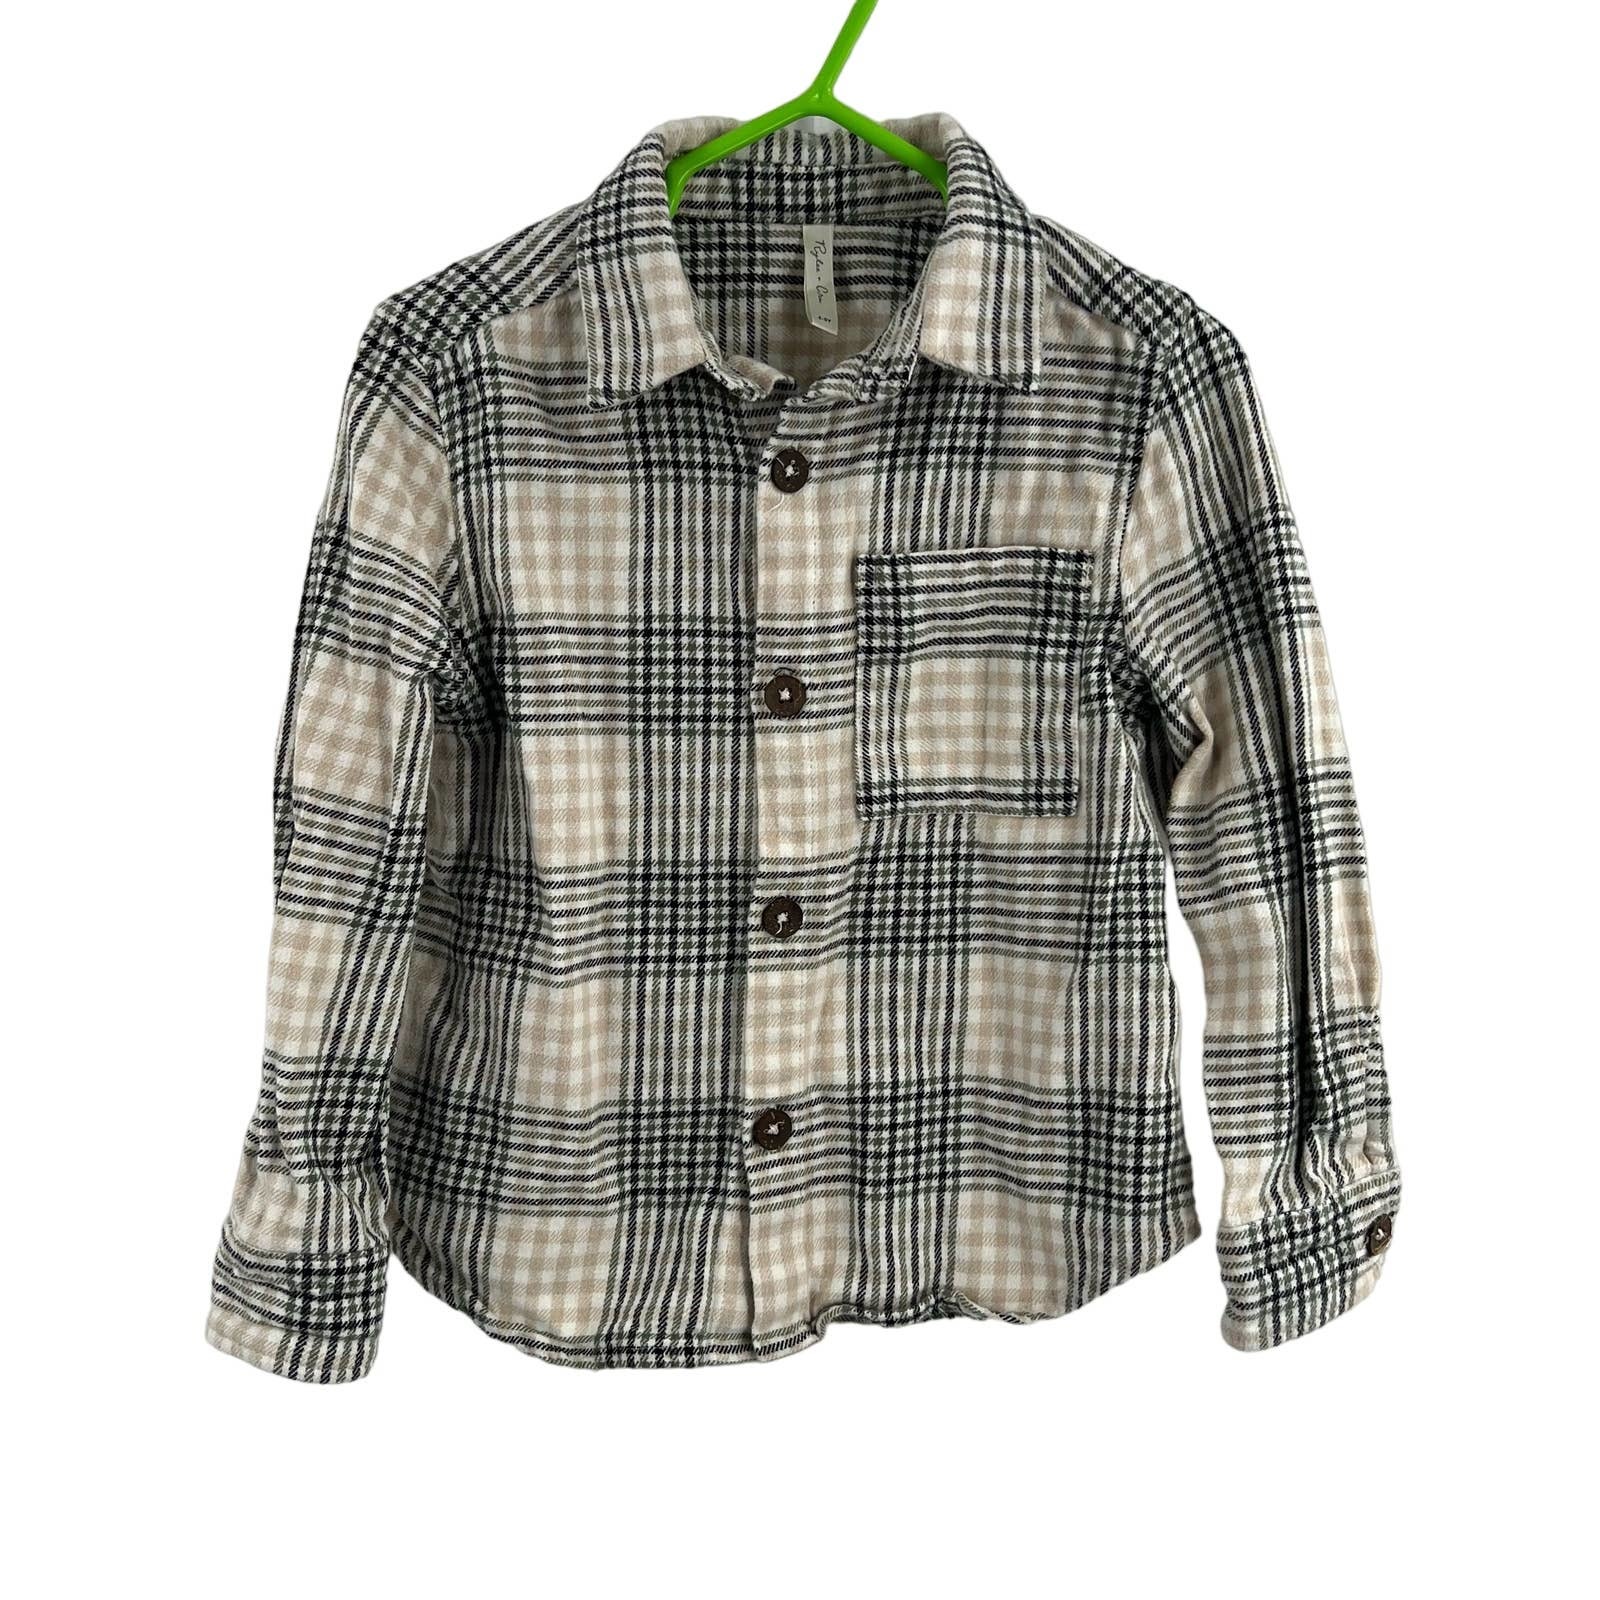 Primary image for Rylee + Cru Plaid Button Front Flannel Shirt 4-5 Year